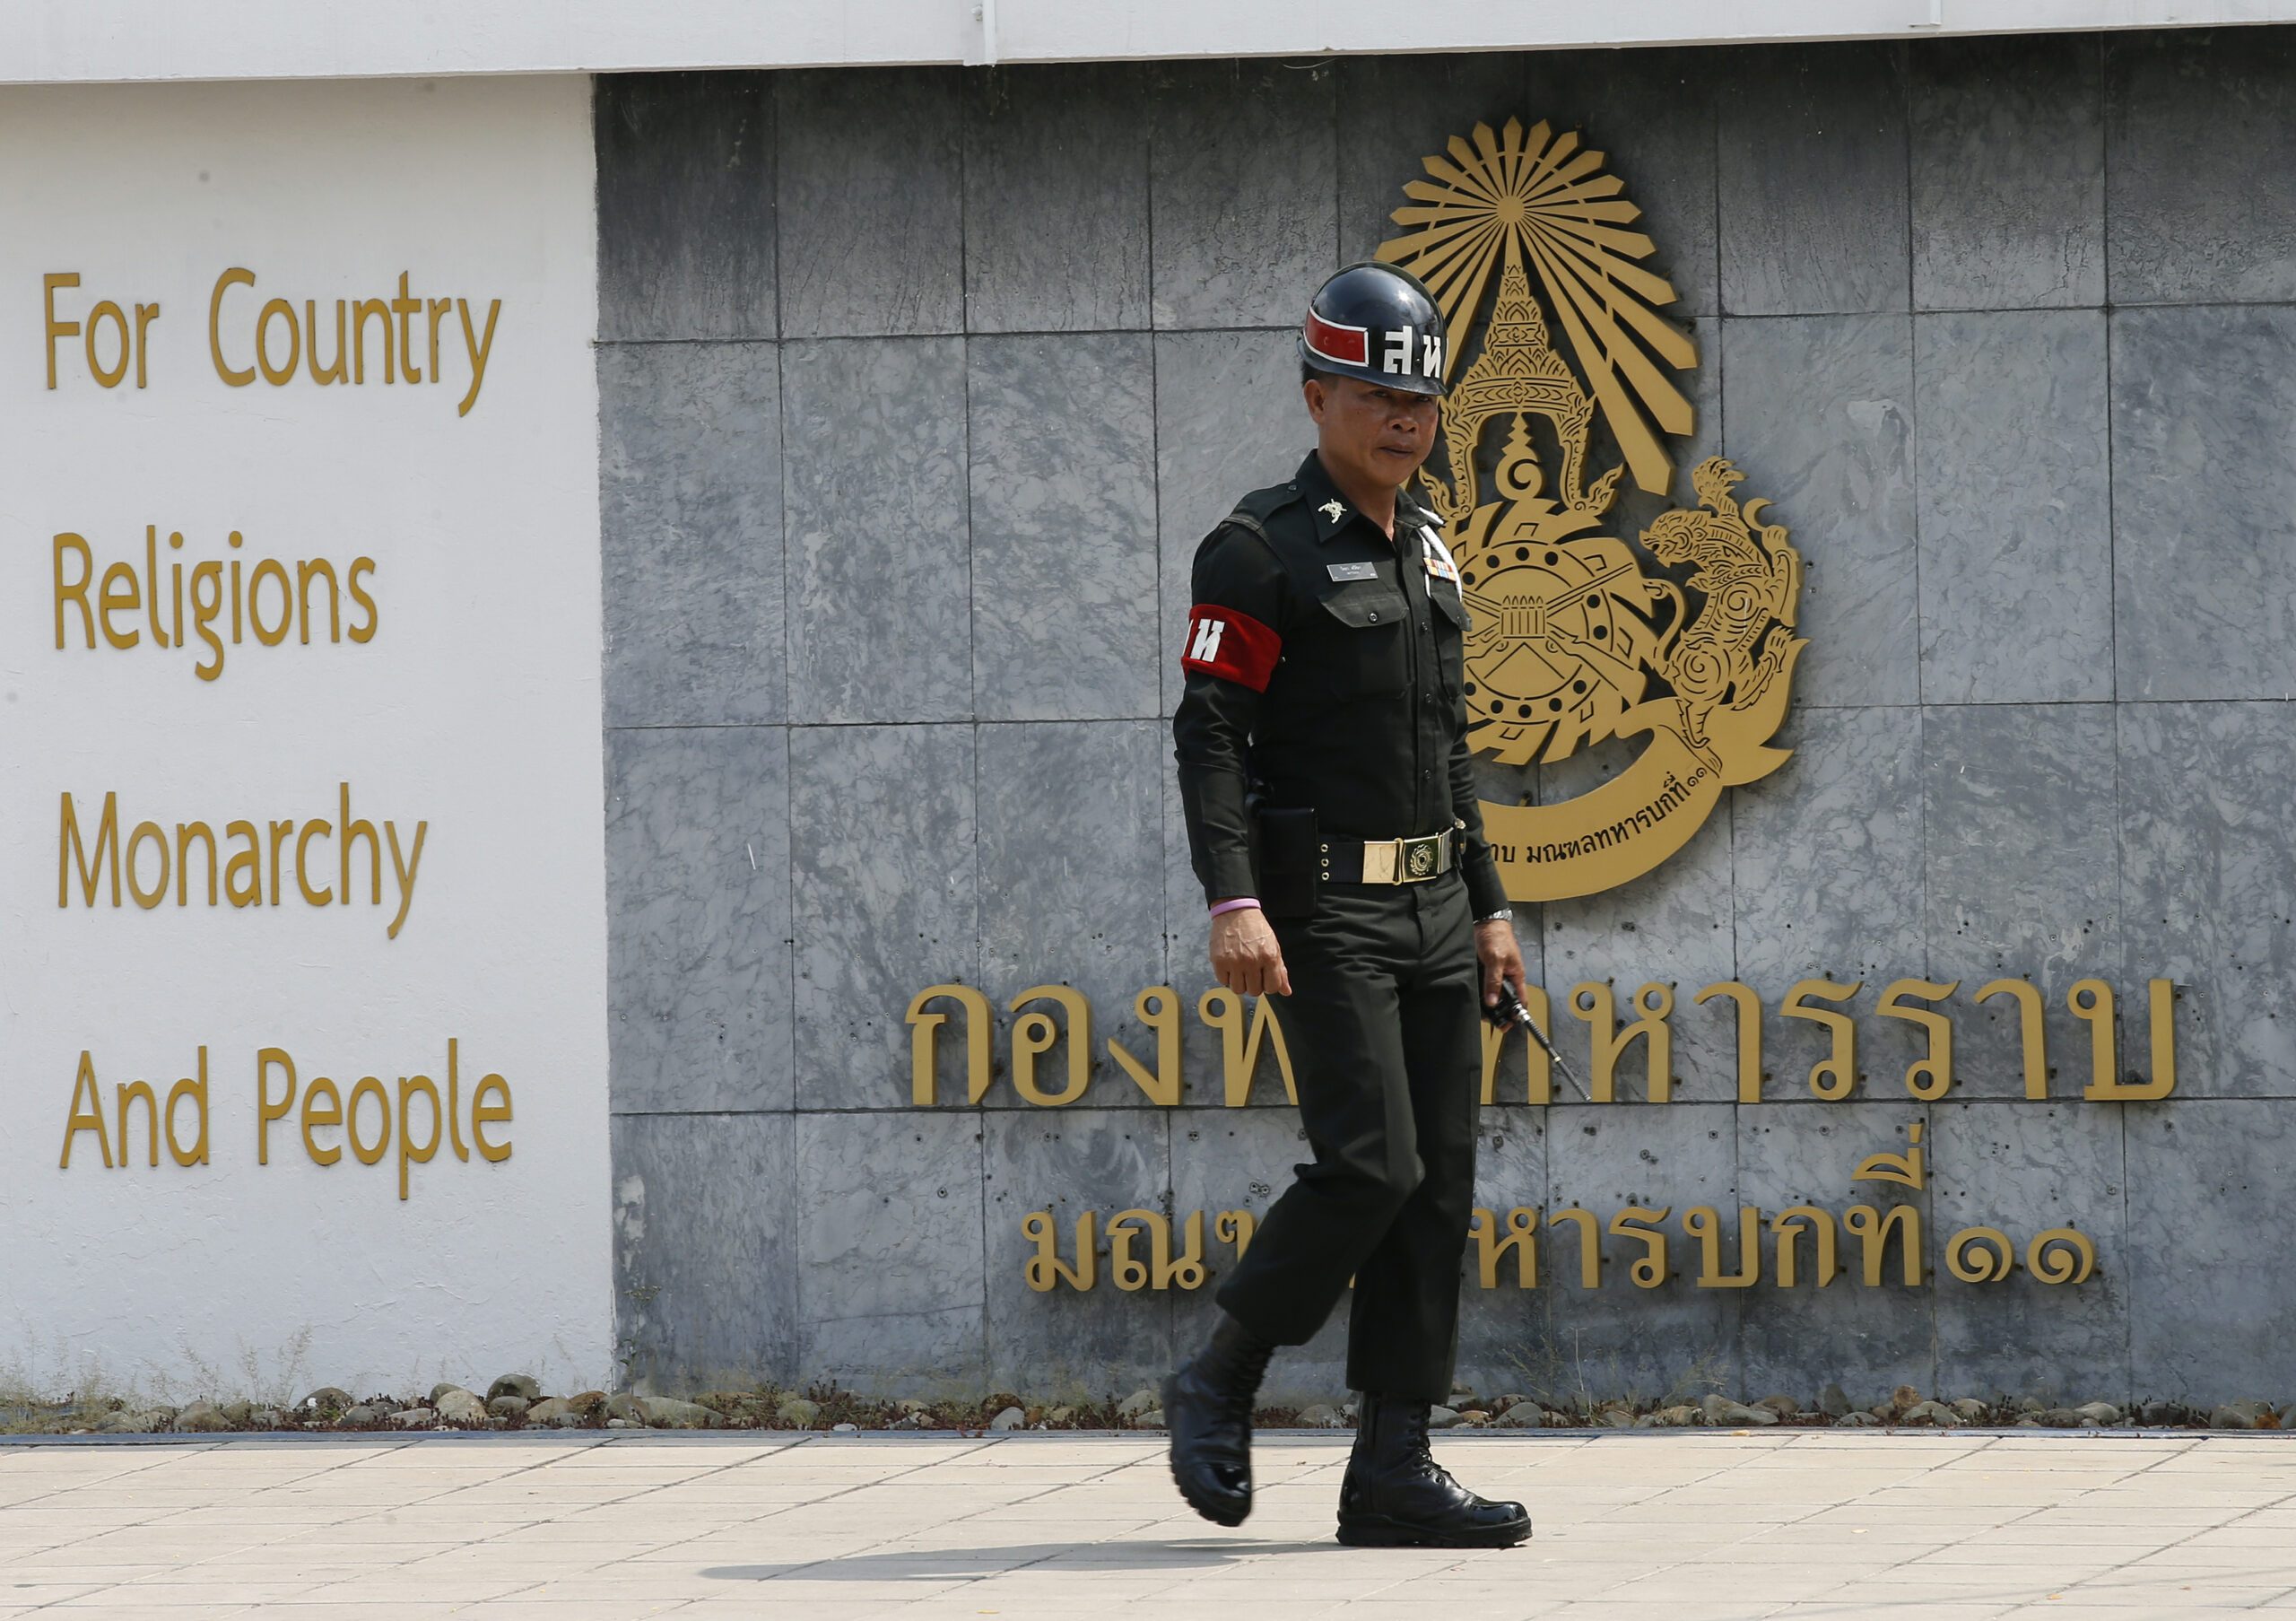 Thailand files first charge under draconian anti-campaigning law